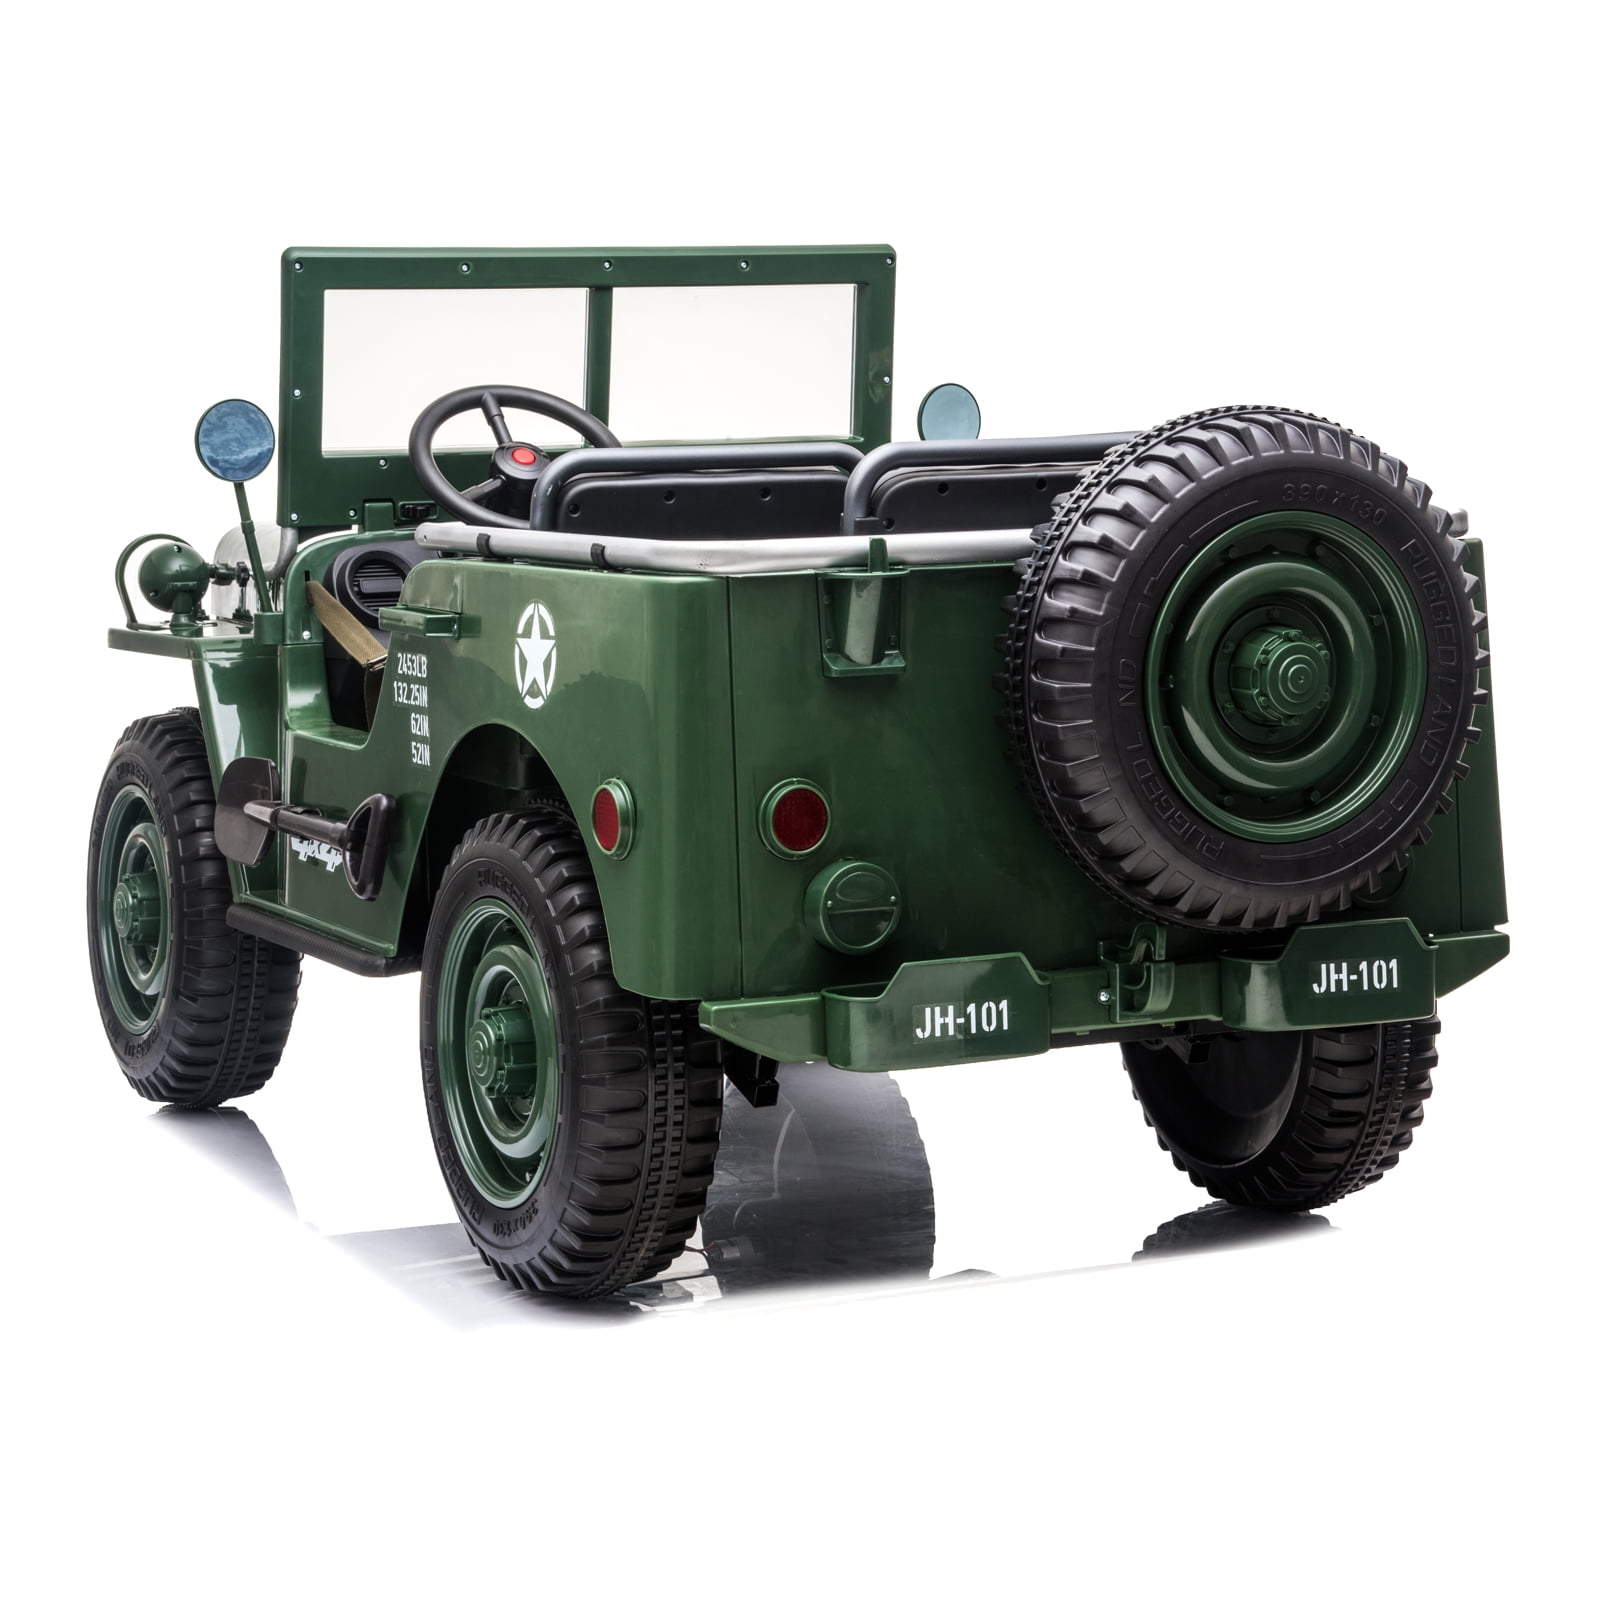 7 Military Electric Deformation Toy Car 8 Year Old Gifts for Birthday. 4 CDDZSW Army Truck Toys for 3-8 Year Old Boys with 3D LED Lights & Sounds 5 Boys Girls Toddler Aged 3 6 